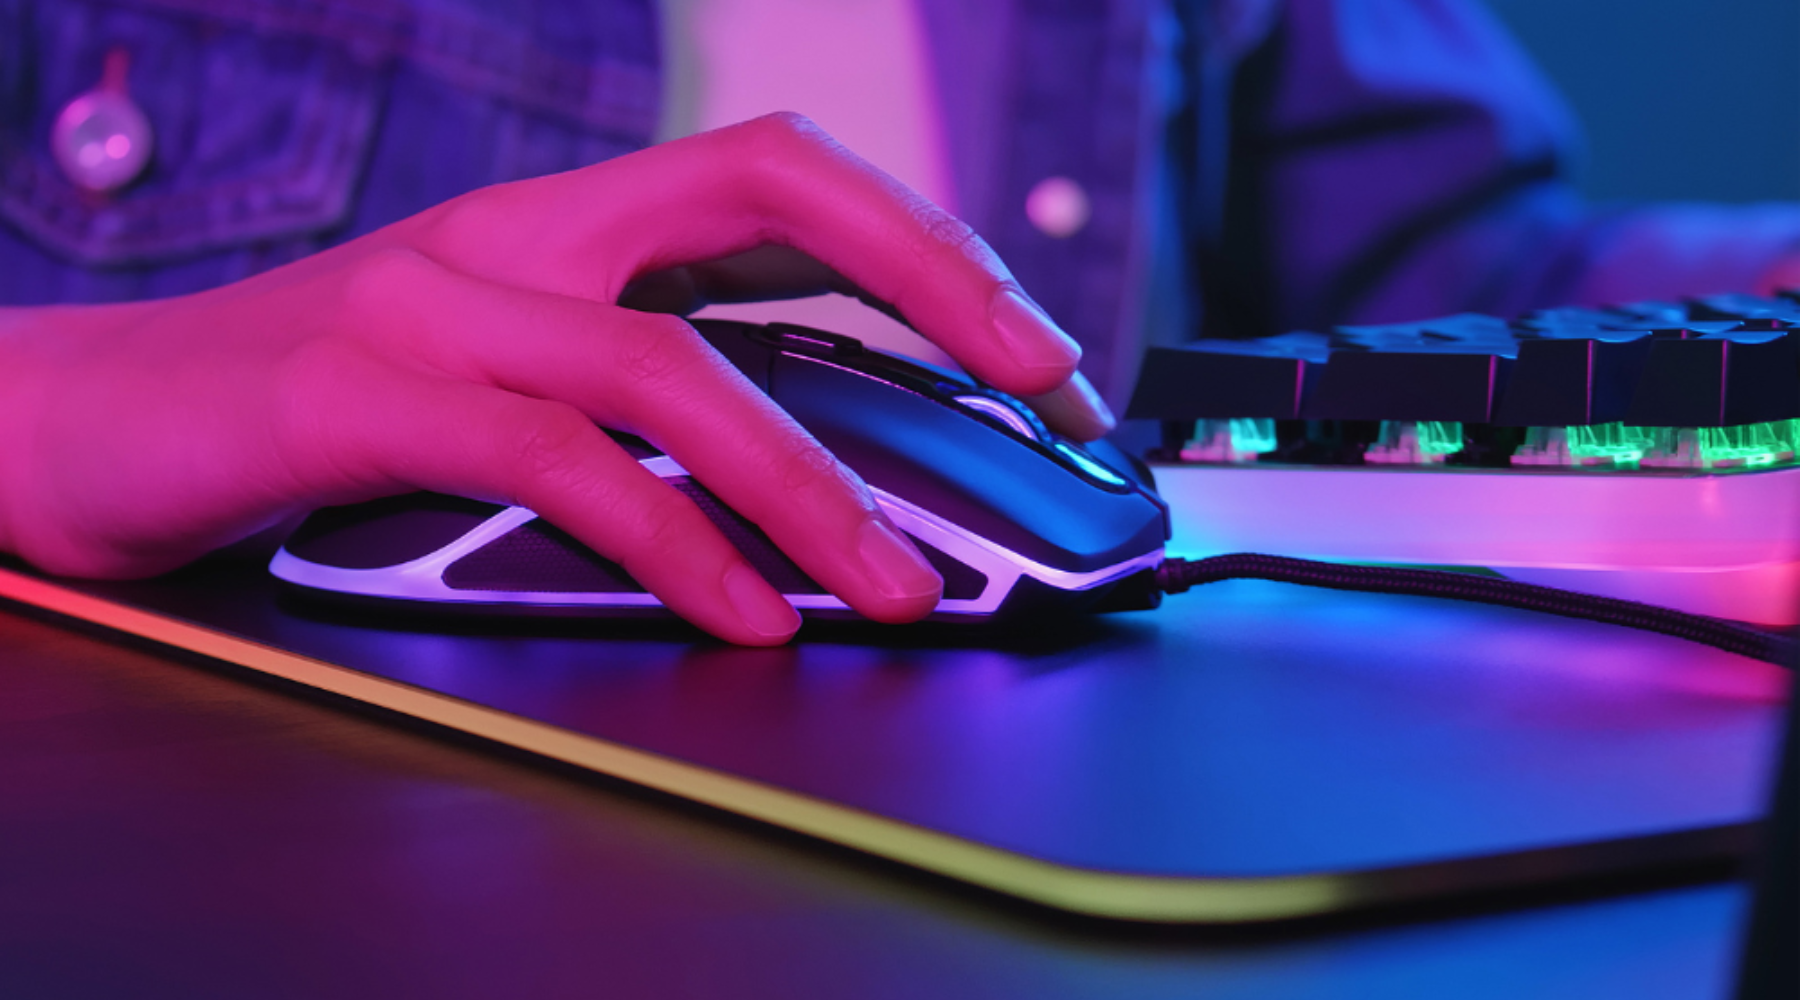 The Gaming Mouse and Gaming Keyboard Buying Guide